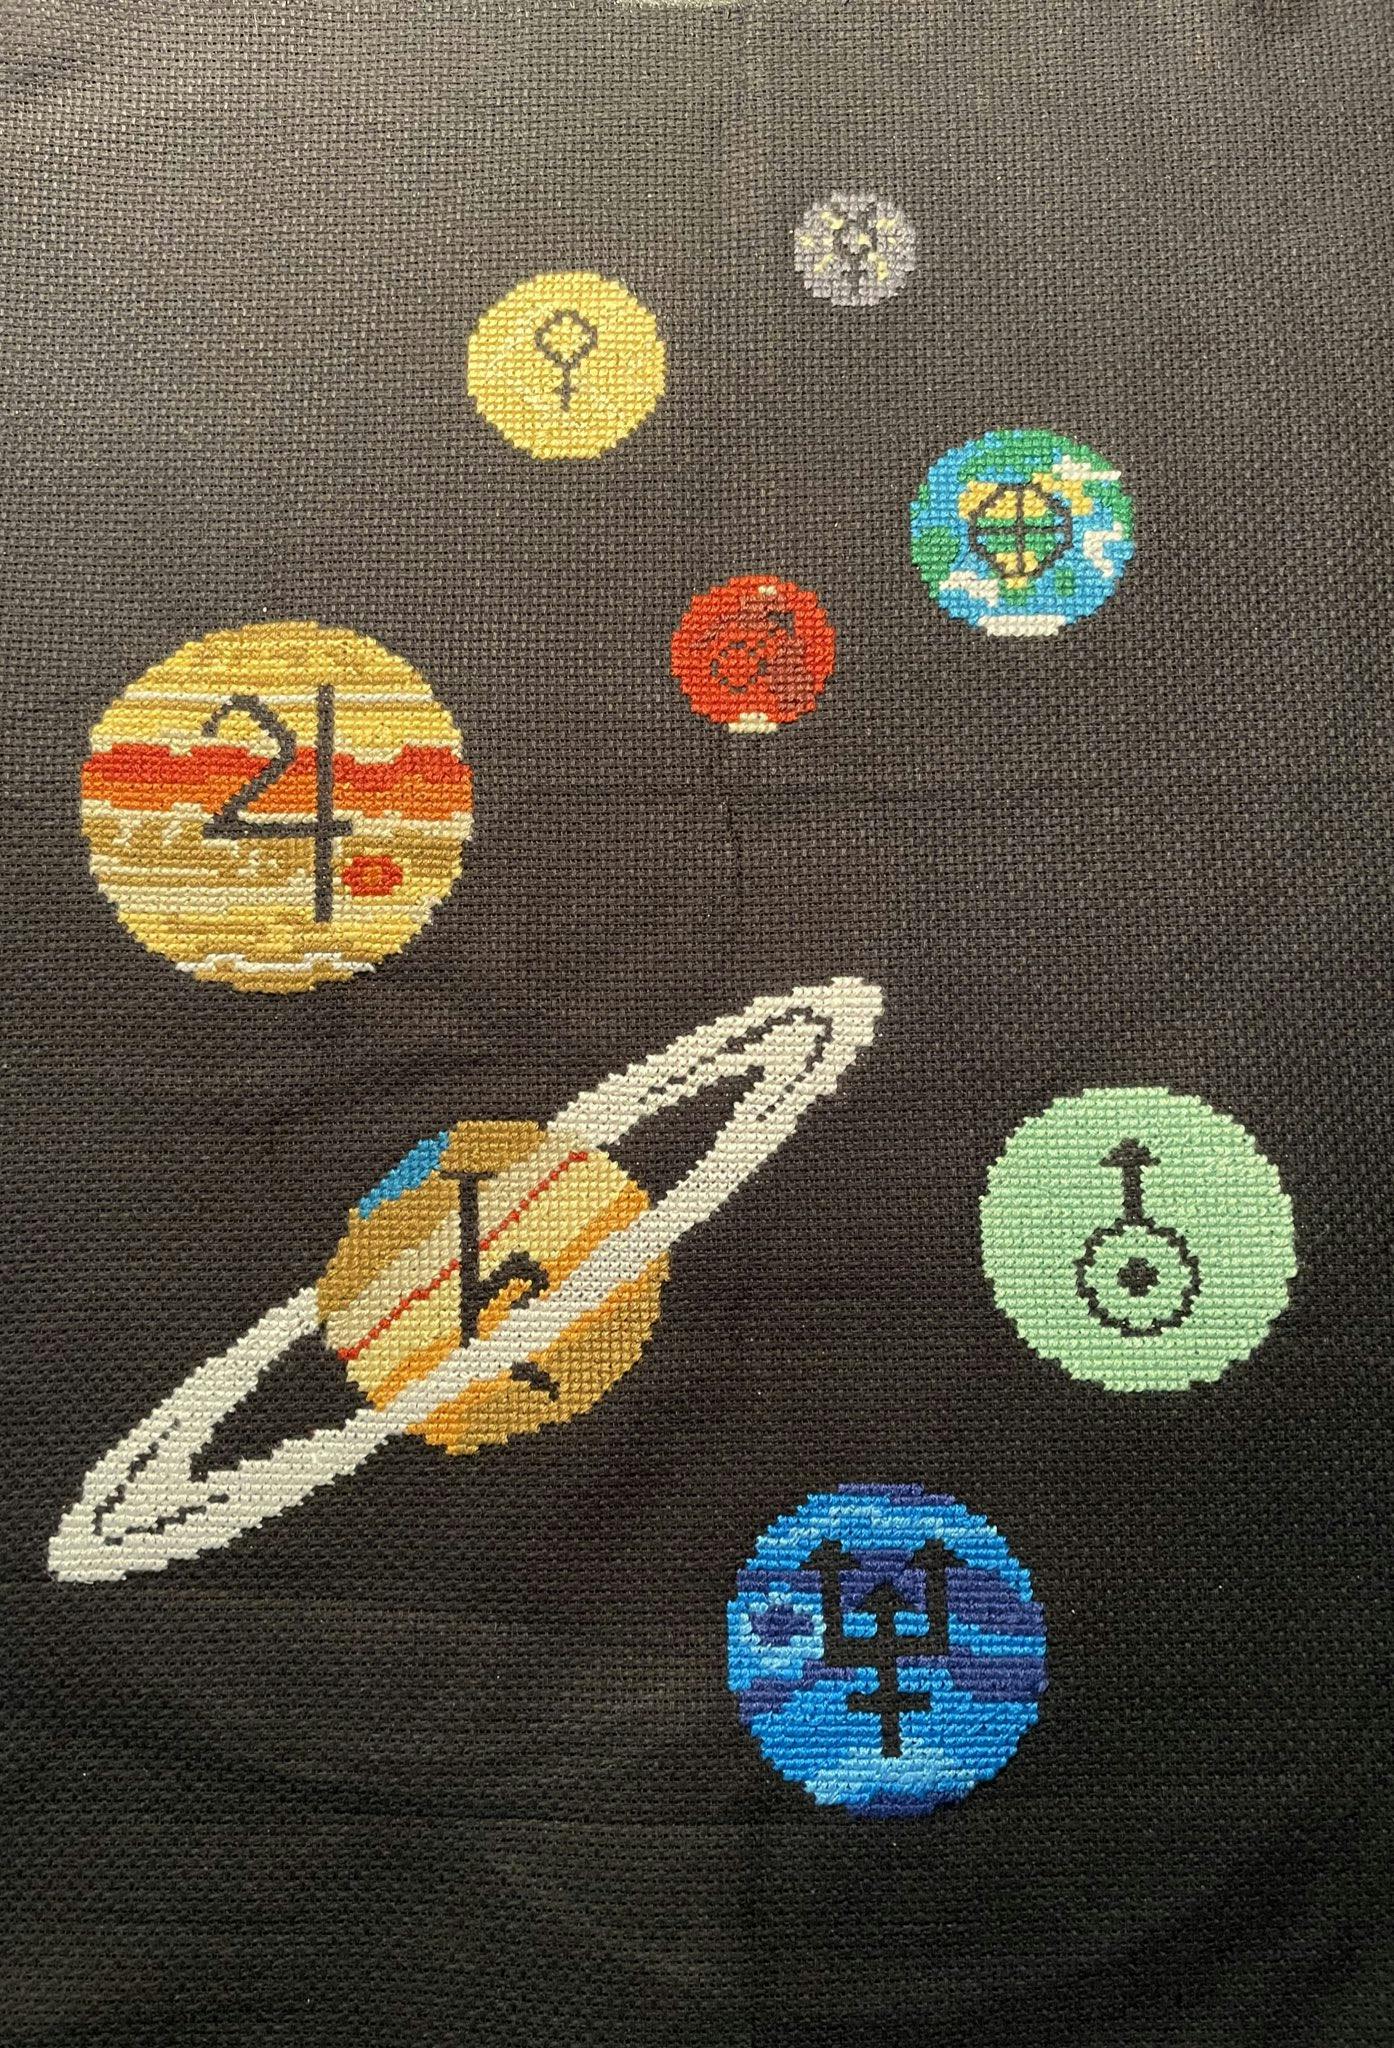 Cross-Stitching The Planets Of The Solar System